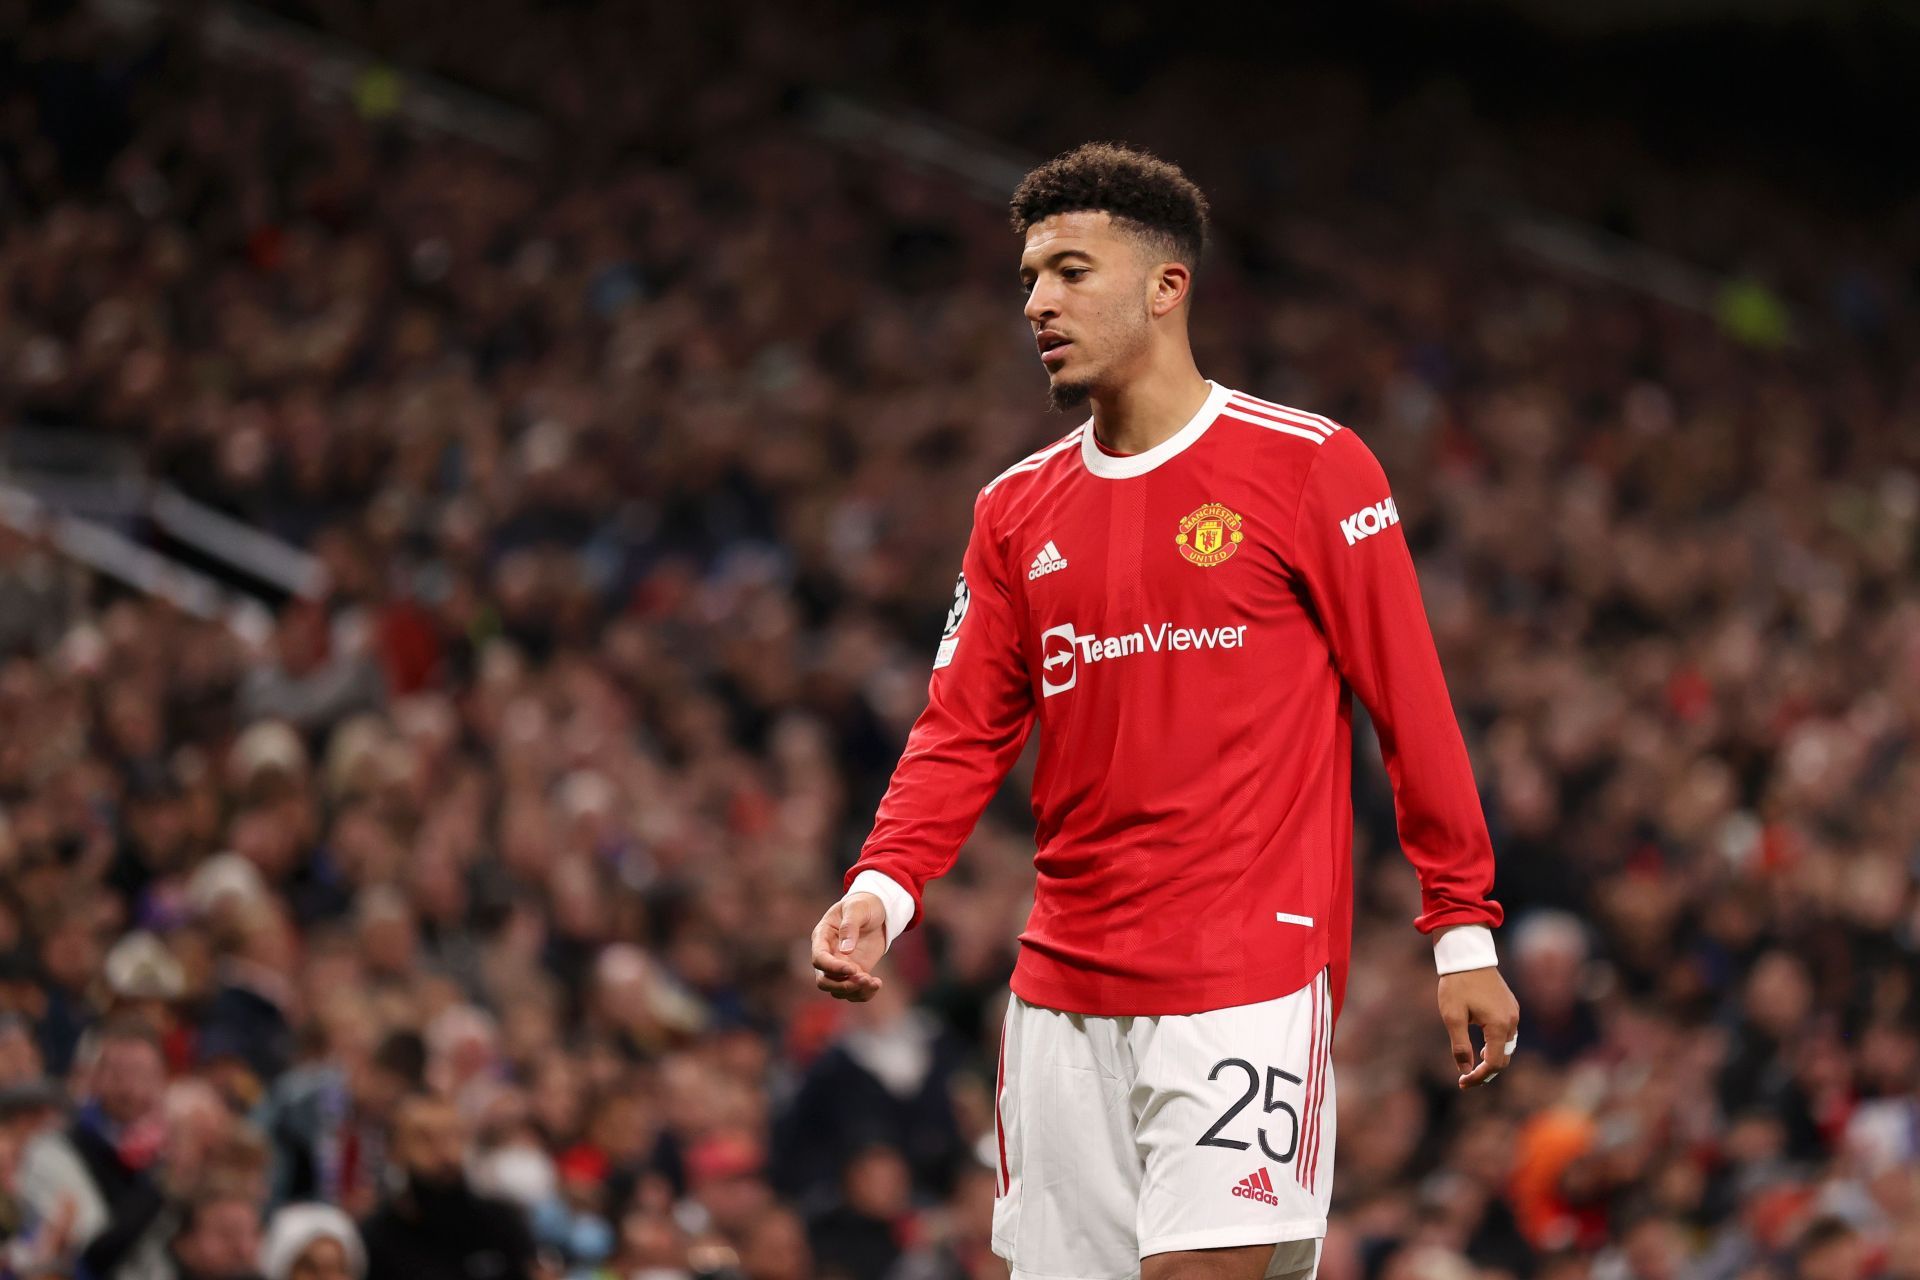 Jadon Sancho has failed to hit the ground running at Old Trafford